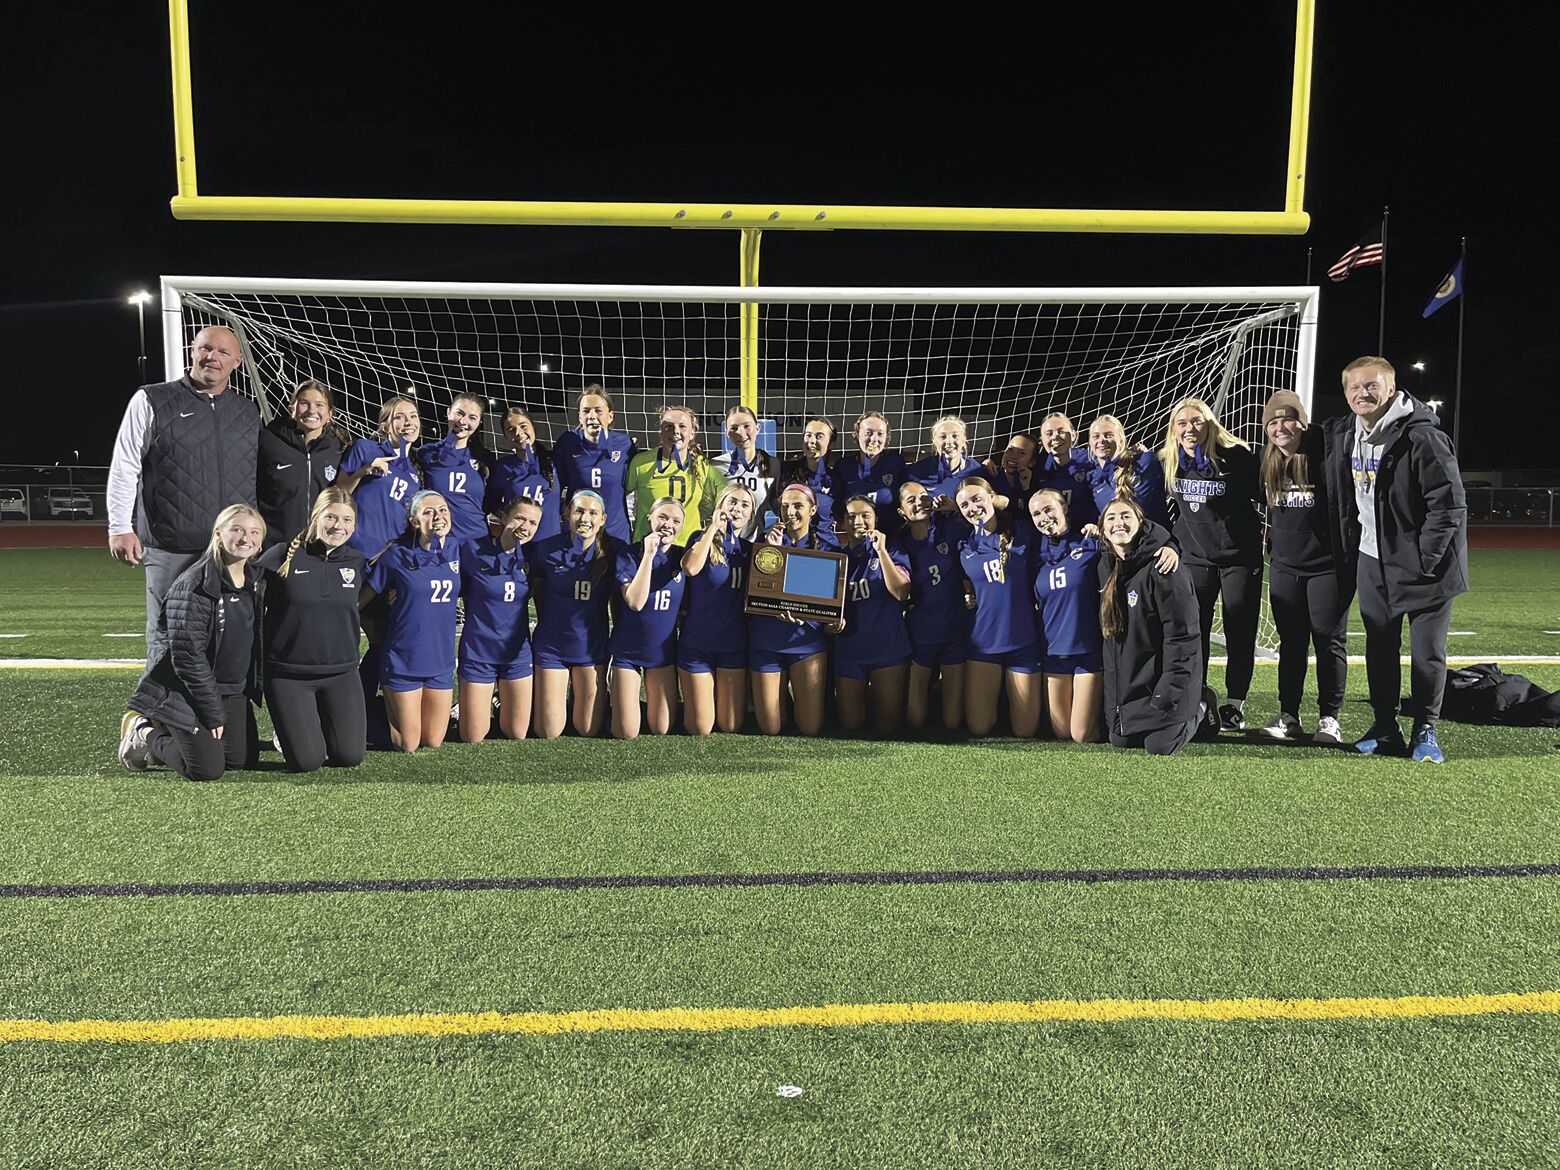 Late goals by Peltz, Kvant, send STMA girls soccer back to state tournament